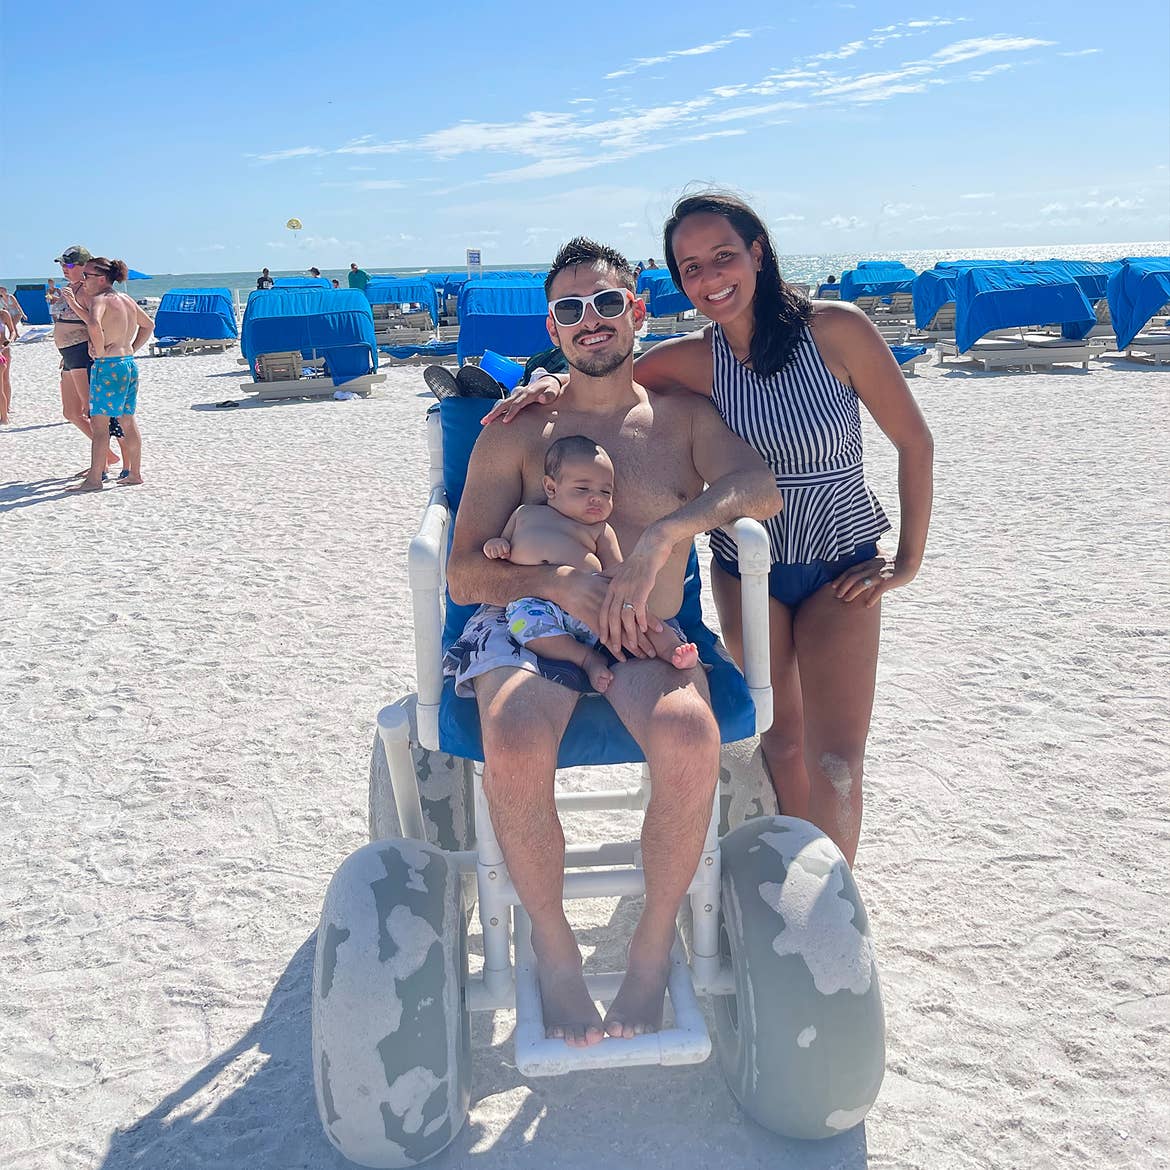 A man in a wheelchair holds an infant next to a woman on a sandy beach.